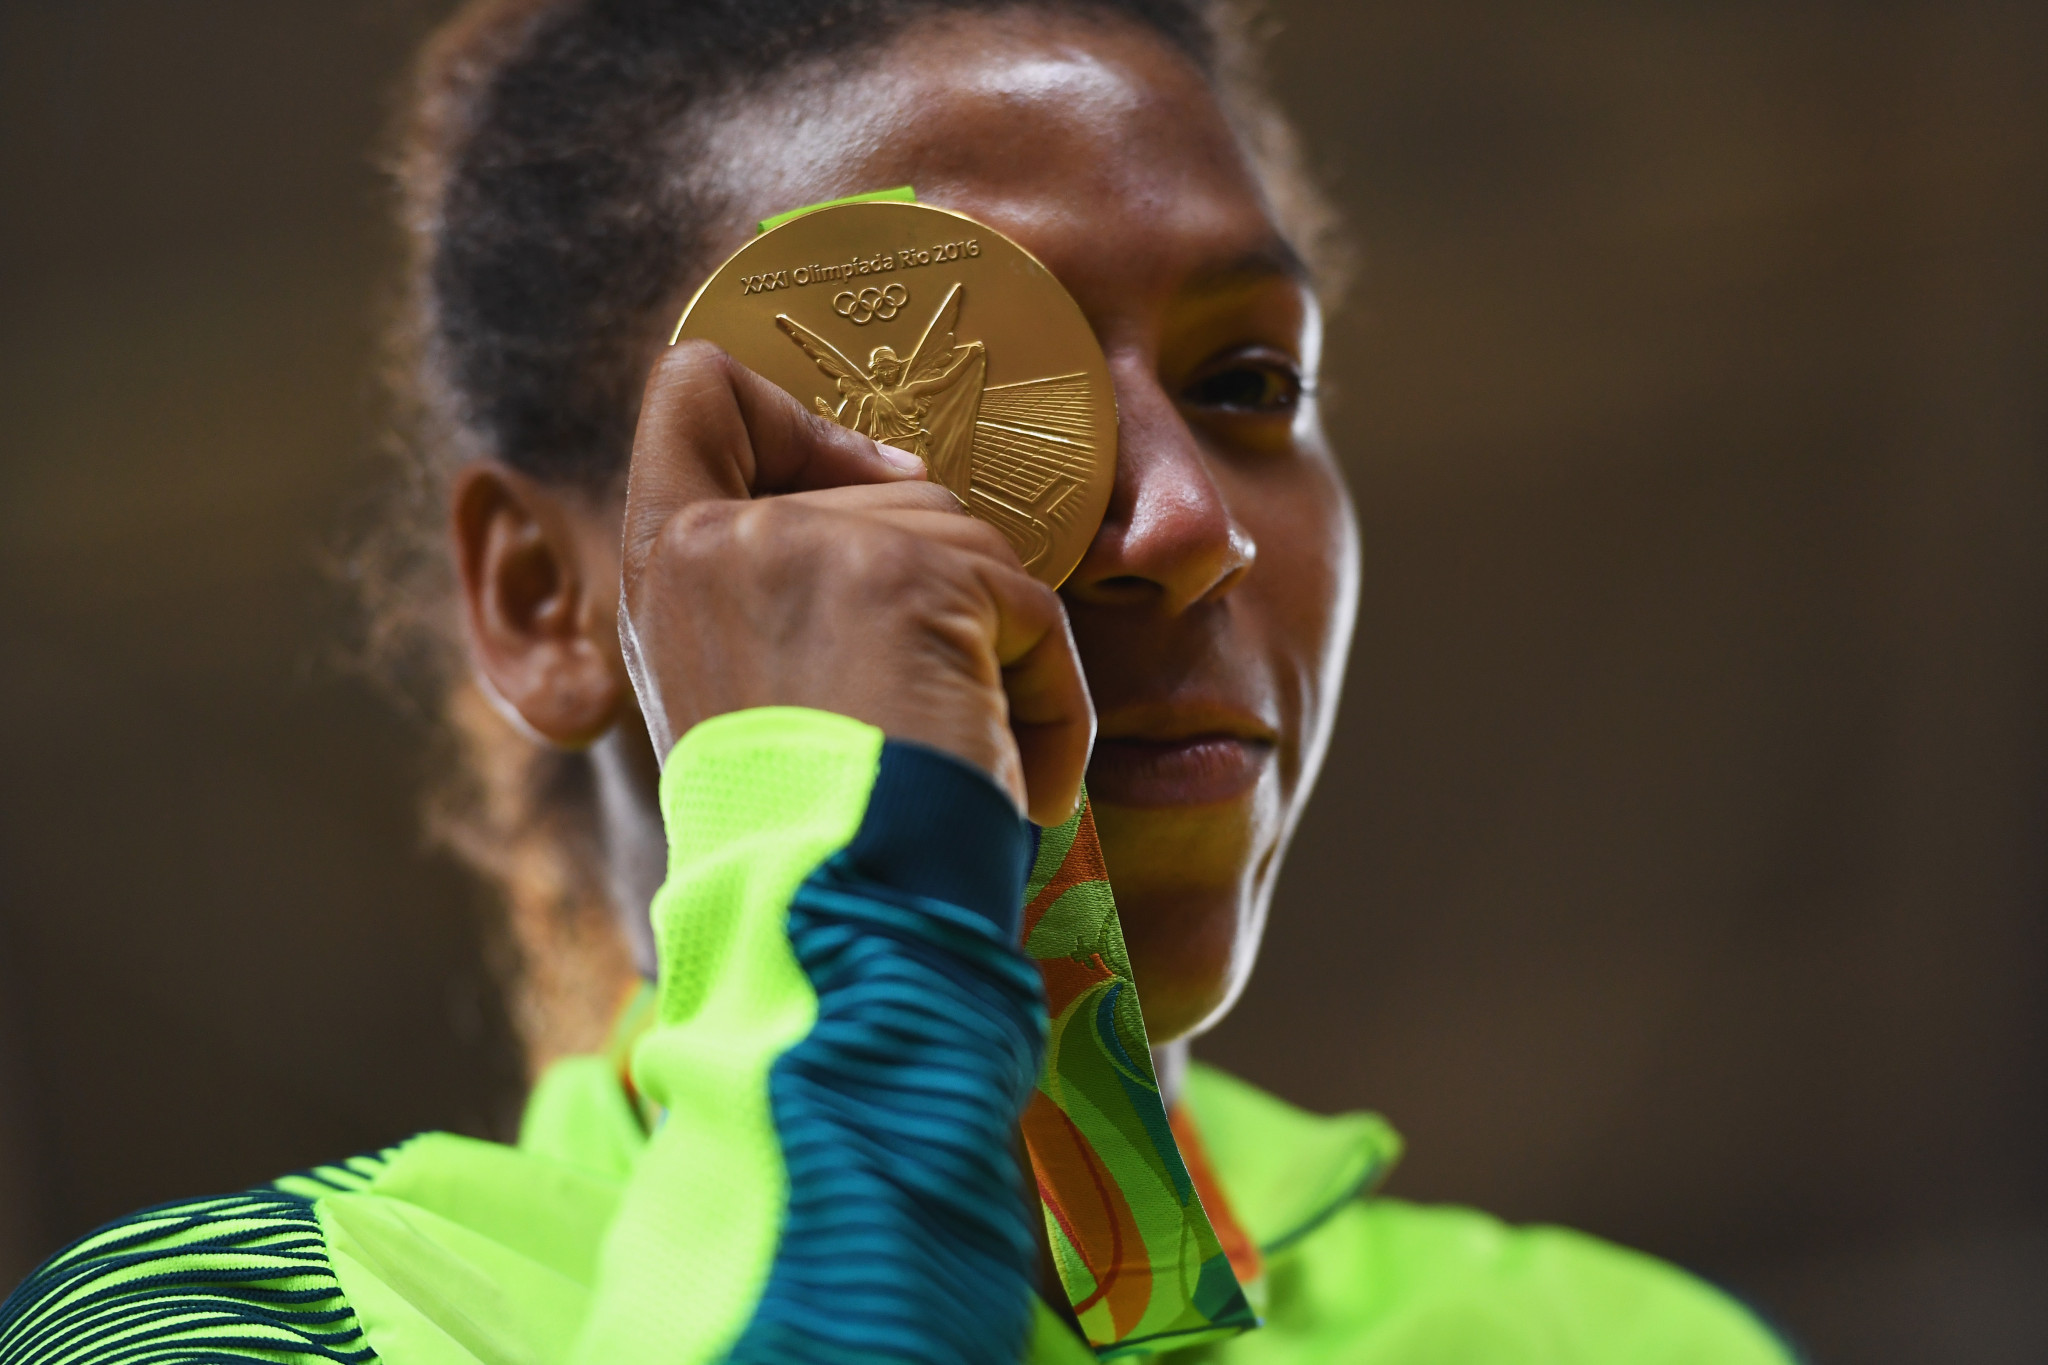 Rafaela Silva is a reigning Olympic judo champion ©Getty Images